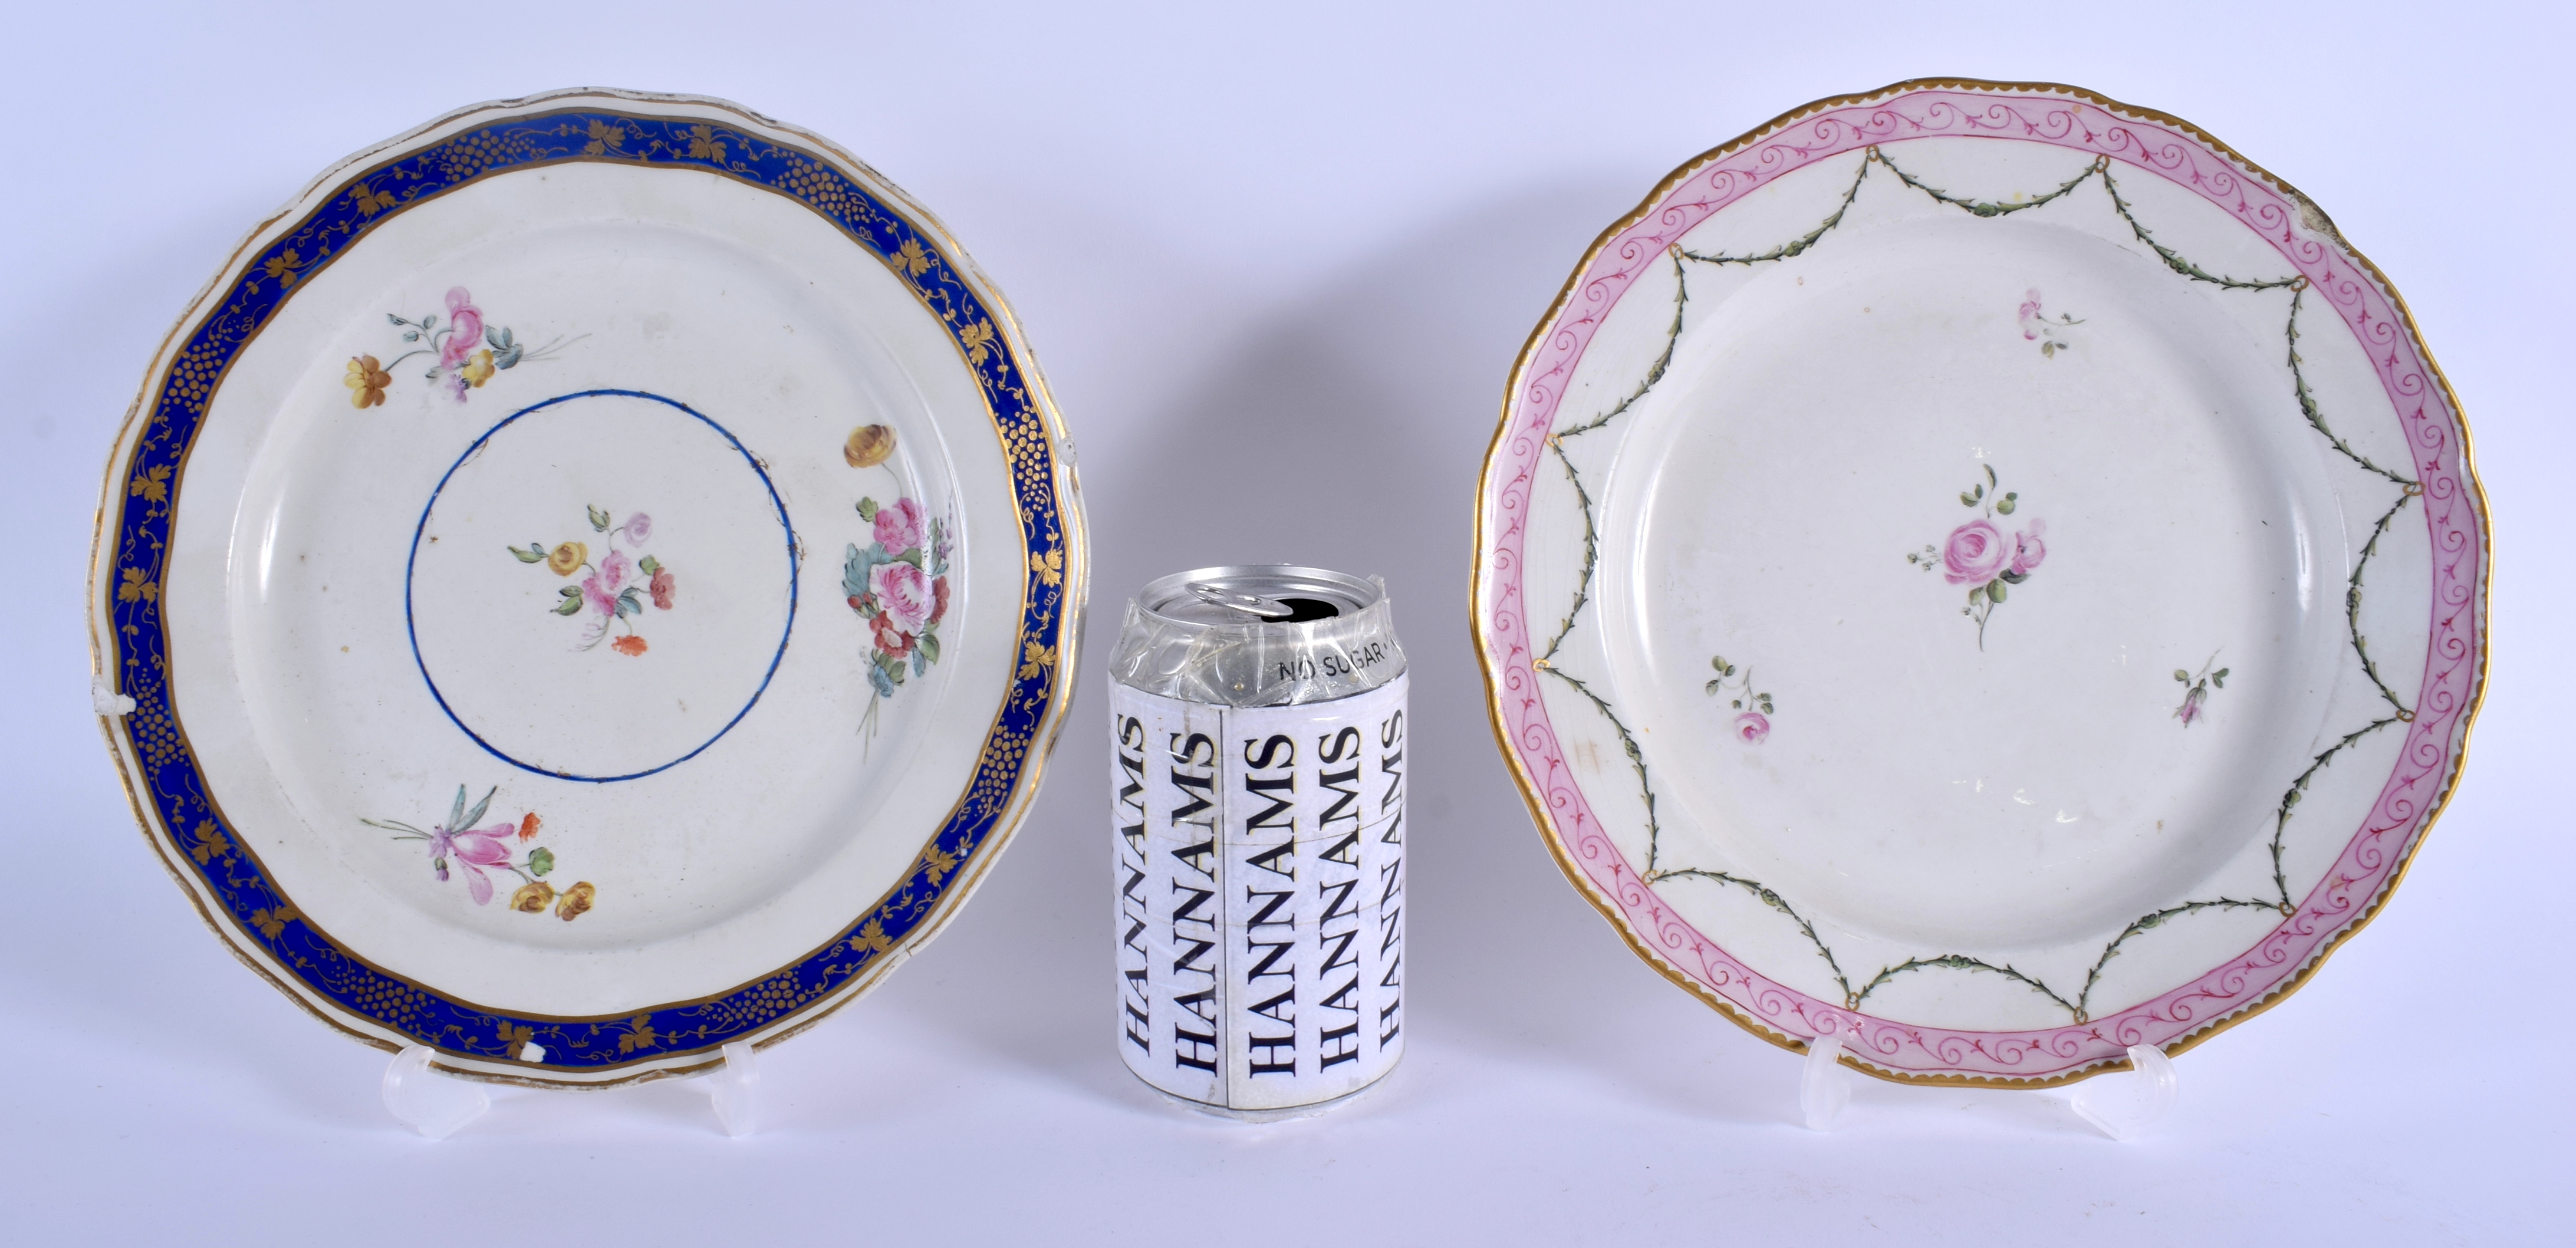 TWO 18TH CENTURY CHELSEA DERBY PORCELAIN PLATES one painted with blue, one painted with a pink borde